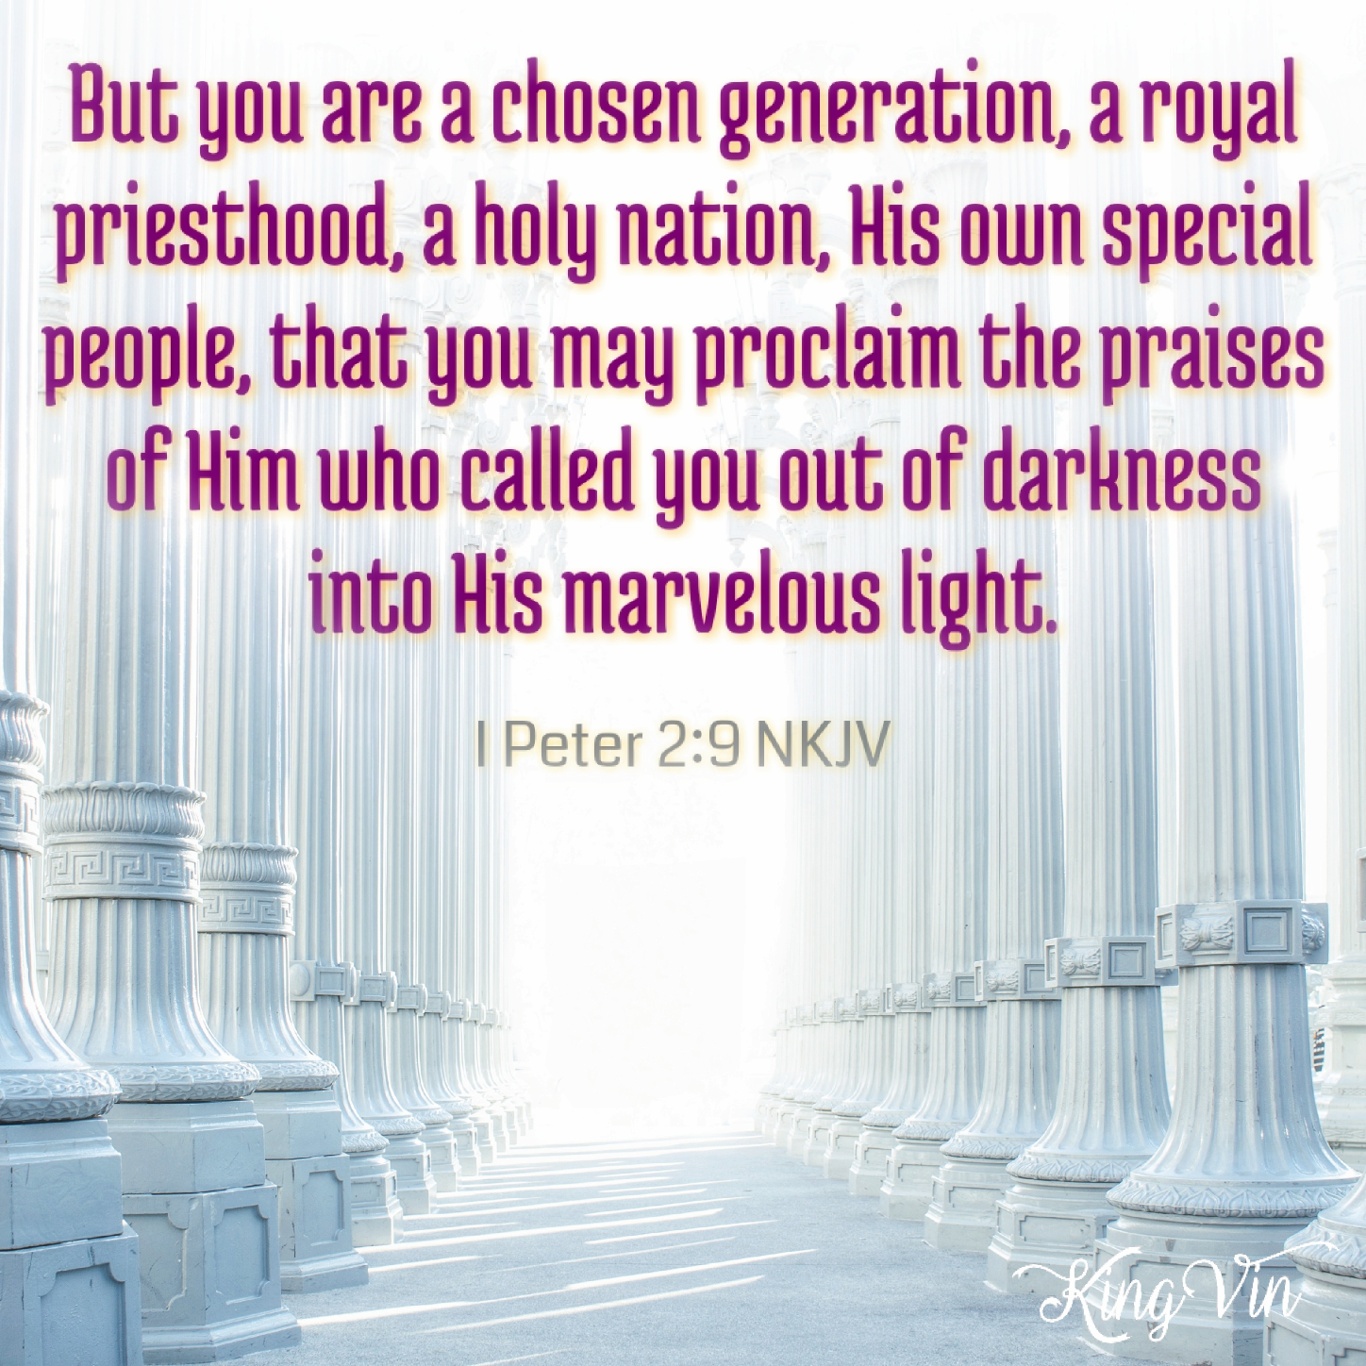 But you are a chosen generation, a royal priesthood, a holy nation, His own special people, that you may proclaim the praises of Him who called you out of darkness into His marvelous light; I Peter 2:9 NKJV